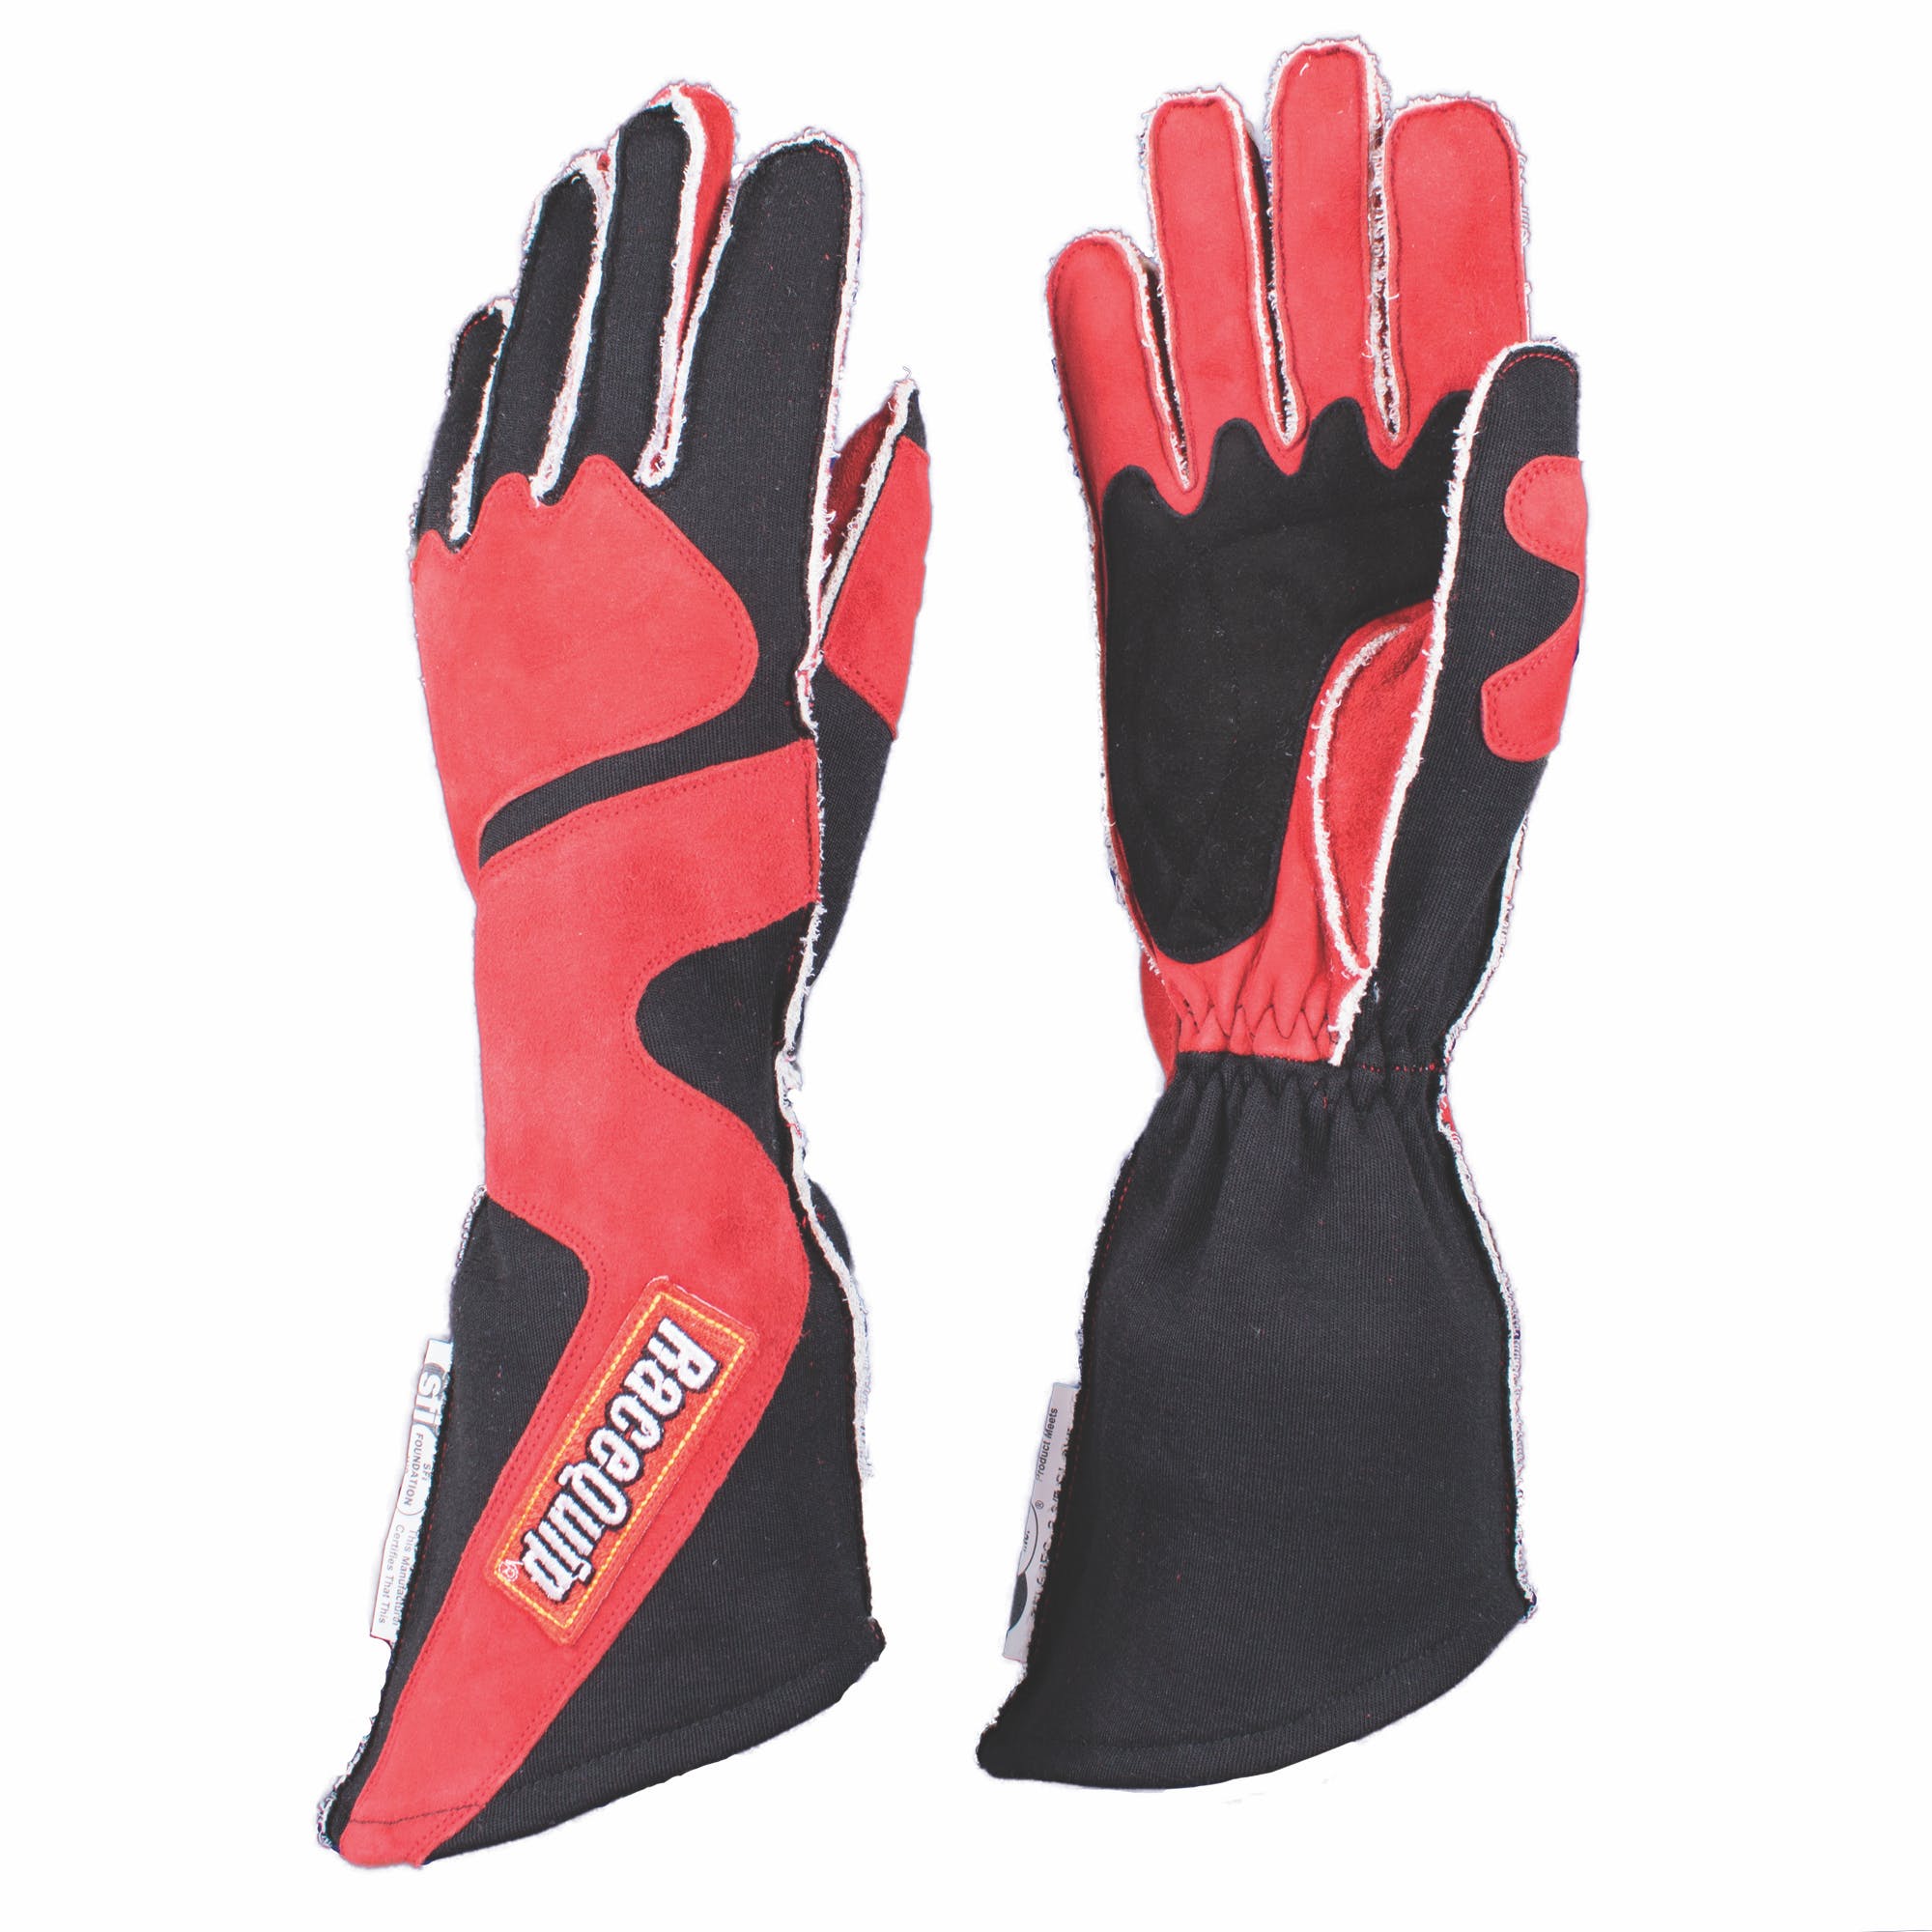 RaceQuip 359105 SFI-5 Out Seam Angle-Cut Gauntlet Racing Gloves (Red/Black, Large)